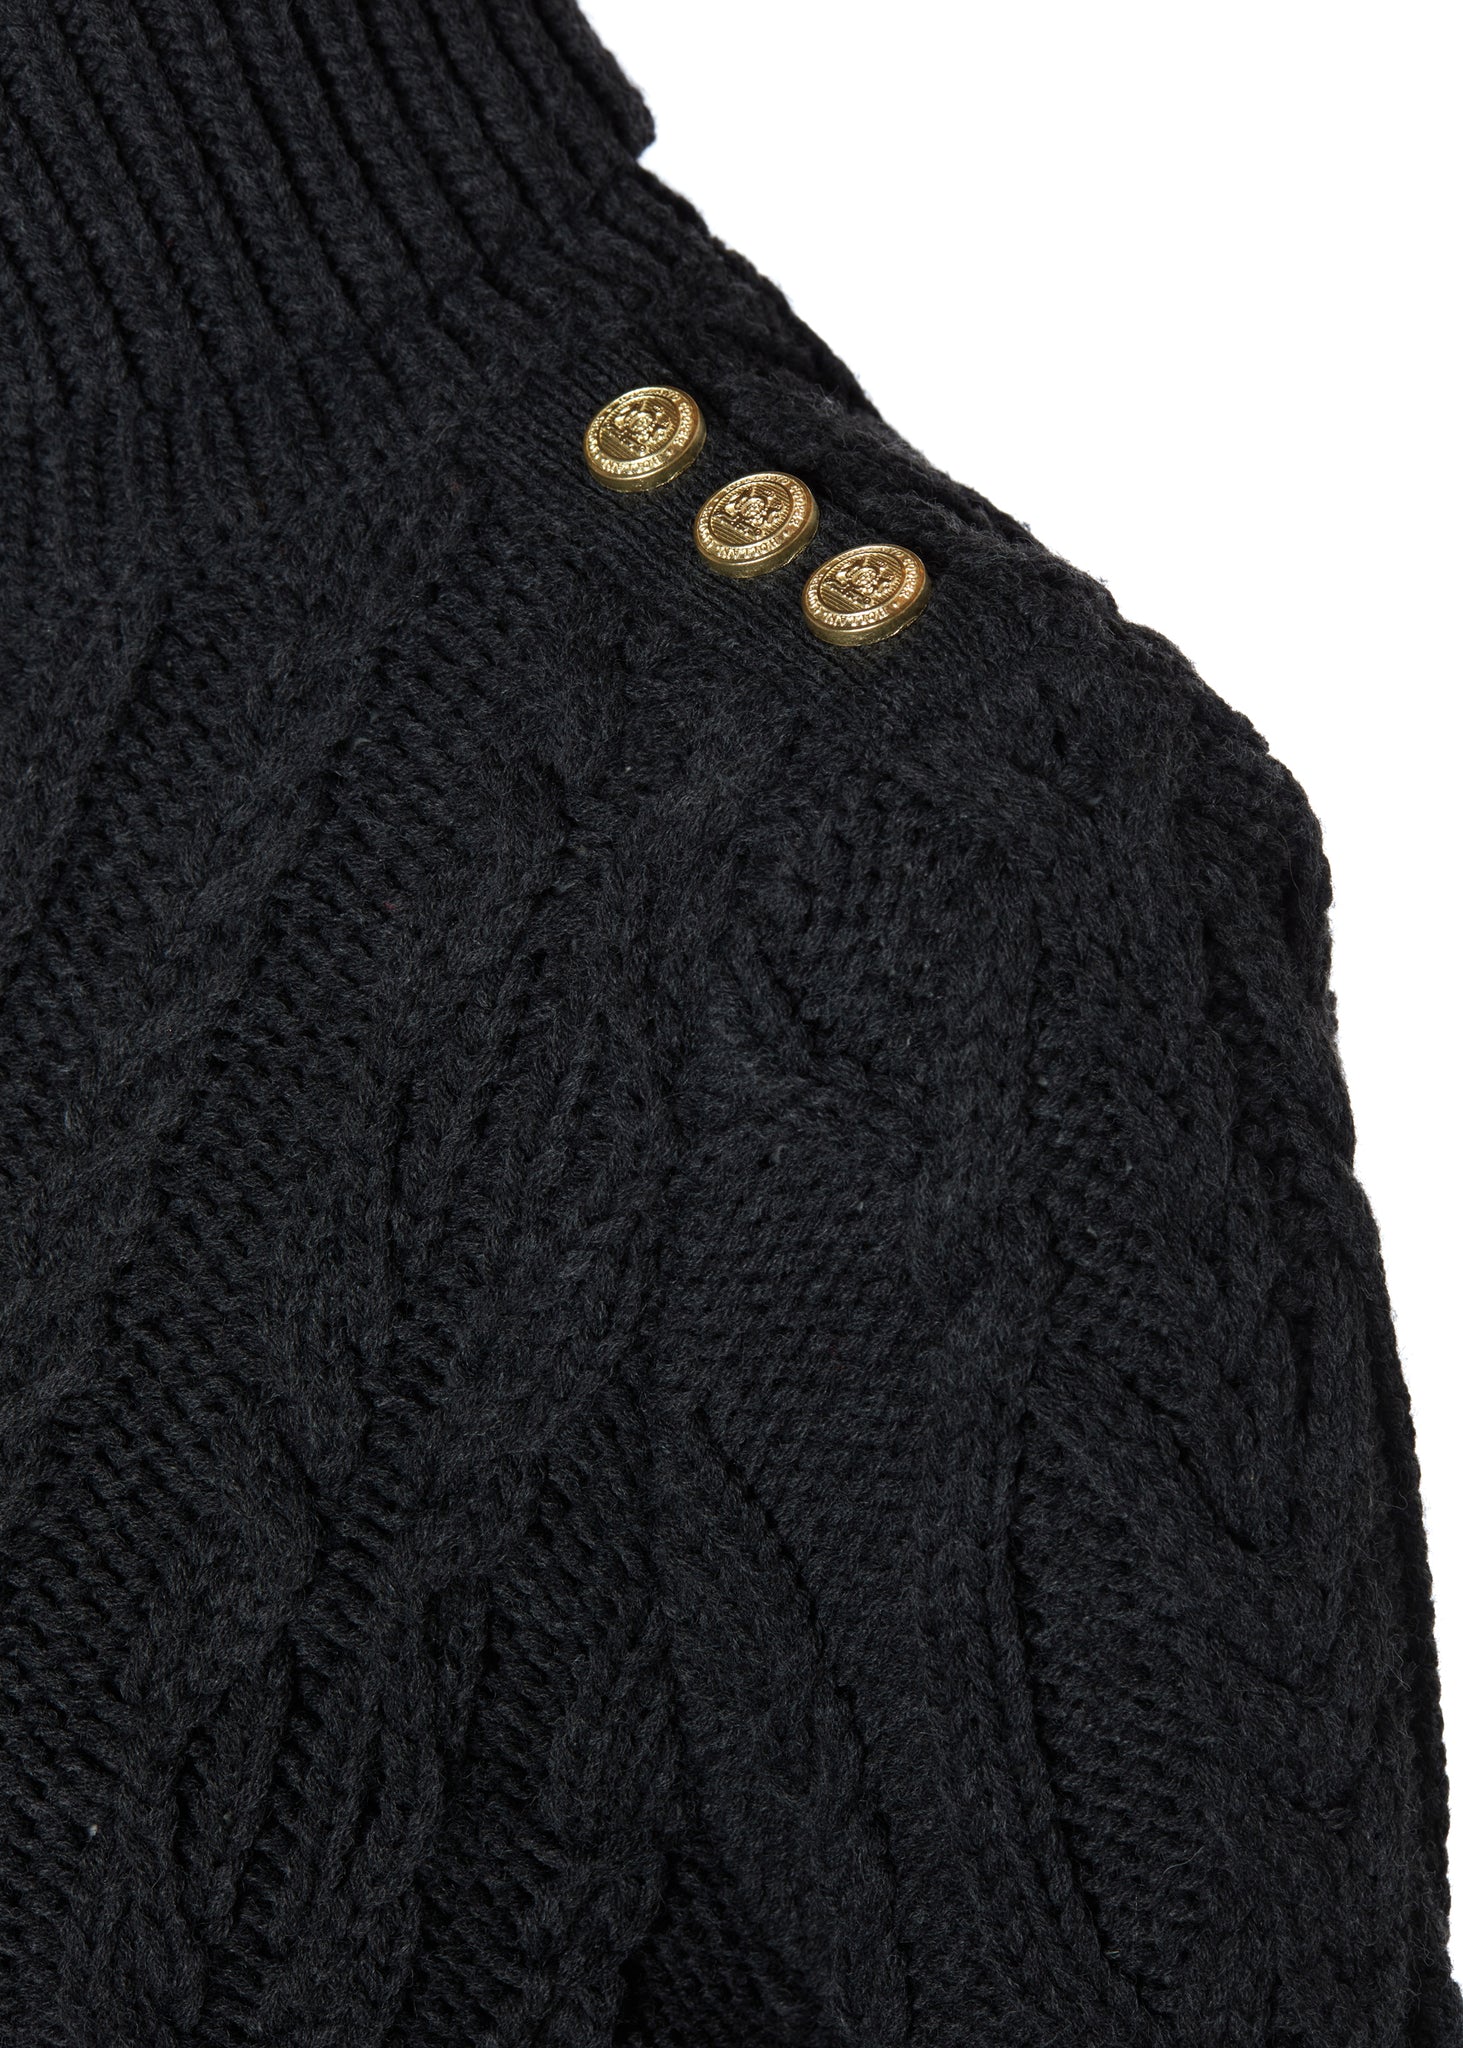 gold button detail across shoulders of a chunky cable knit roll neck jumper in dark grey with dropped shoulders and thick ribbed cable trims and gold buttons on cuffs and collar